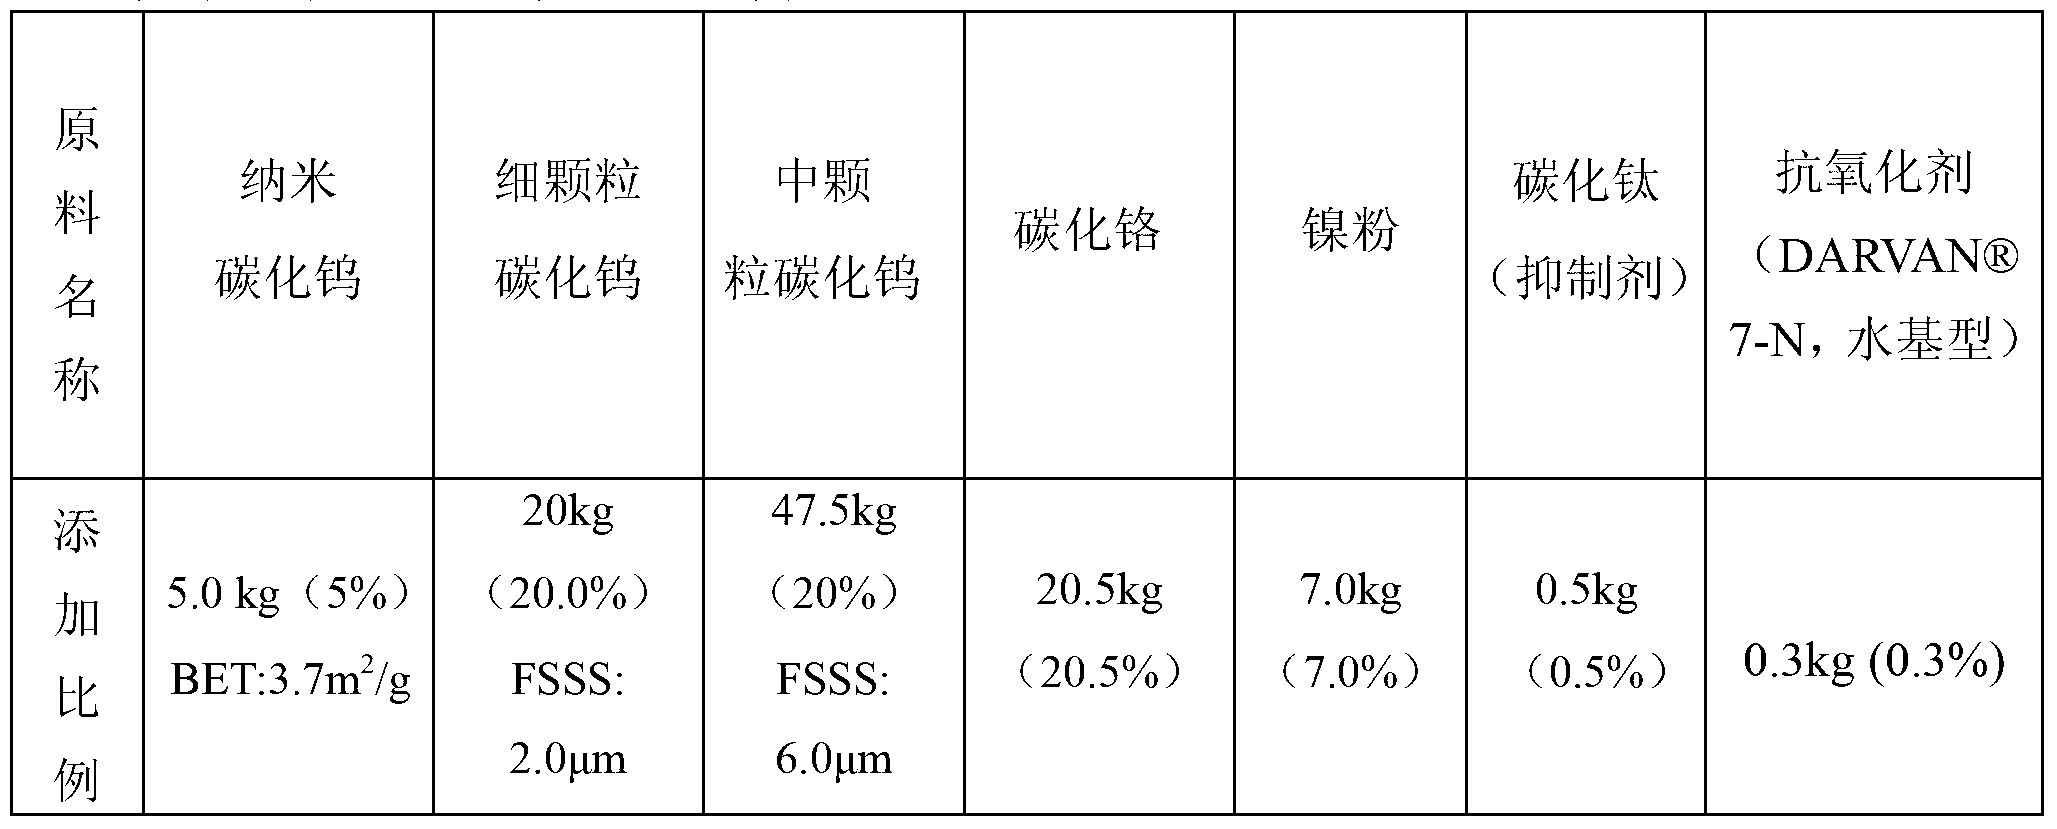 WC-Cr3C2-Ni thermal spraying powder, and preparation method and applications thereof